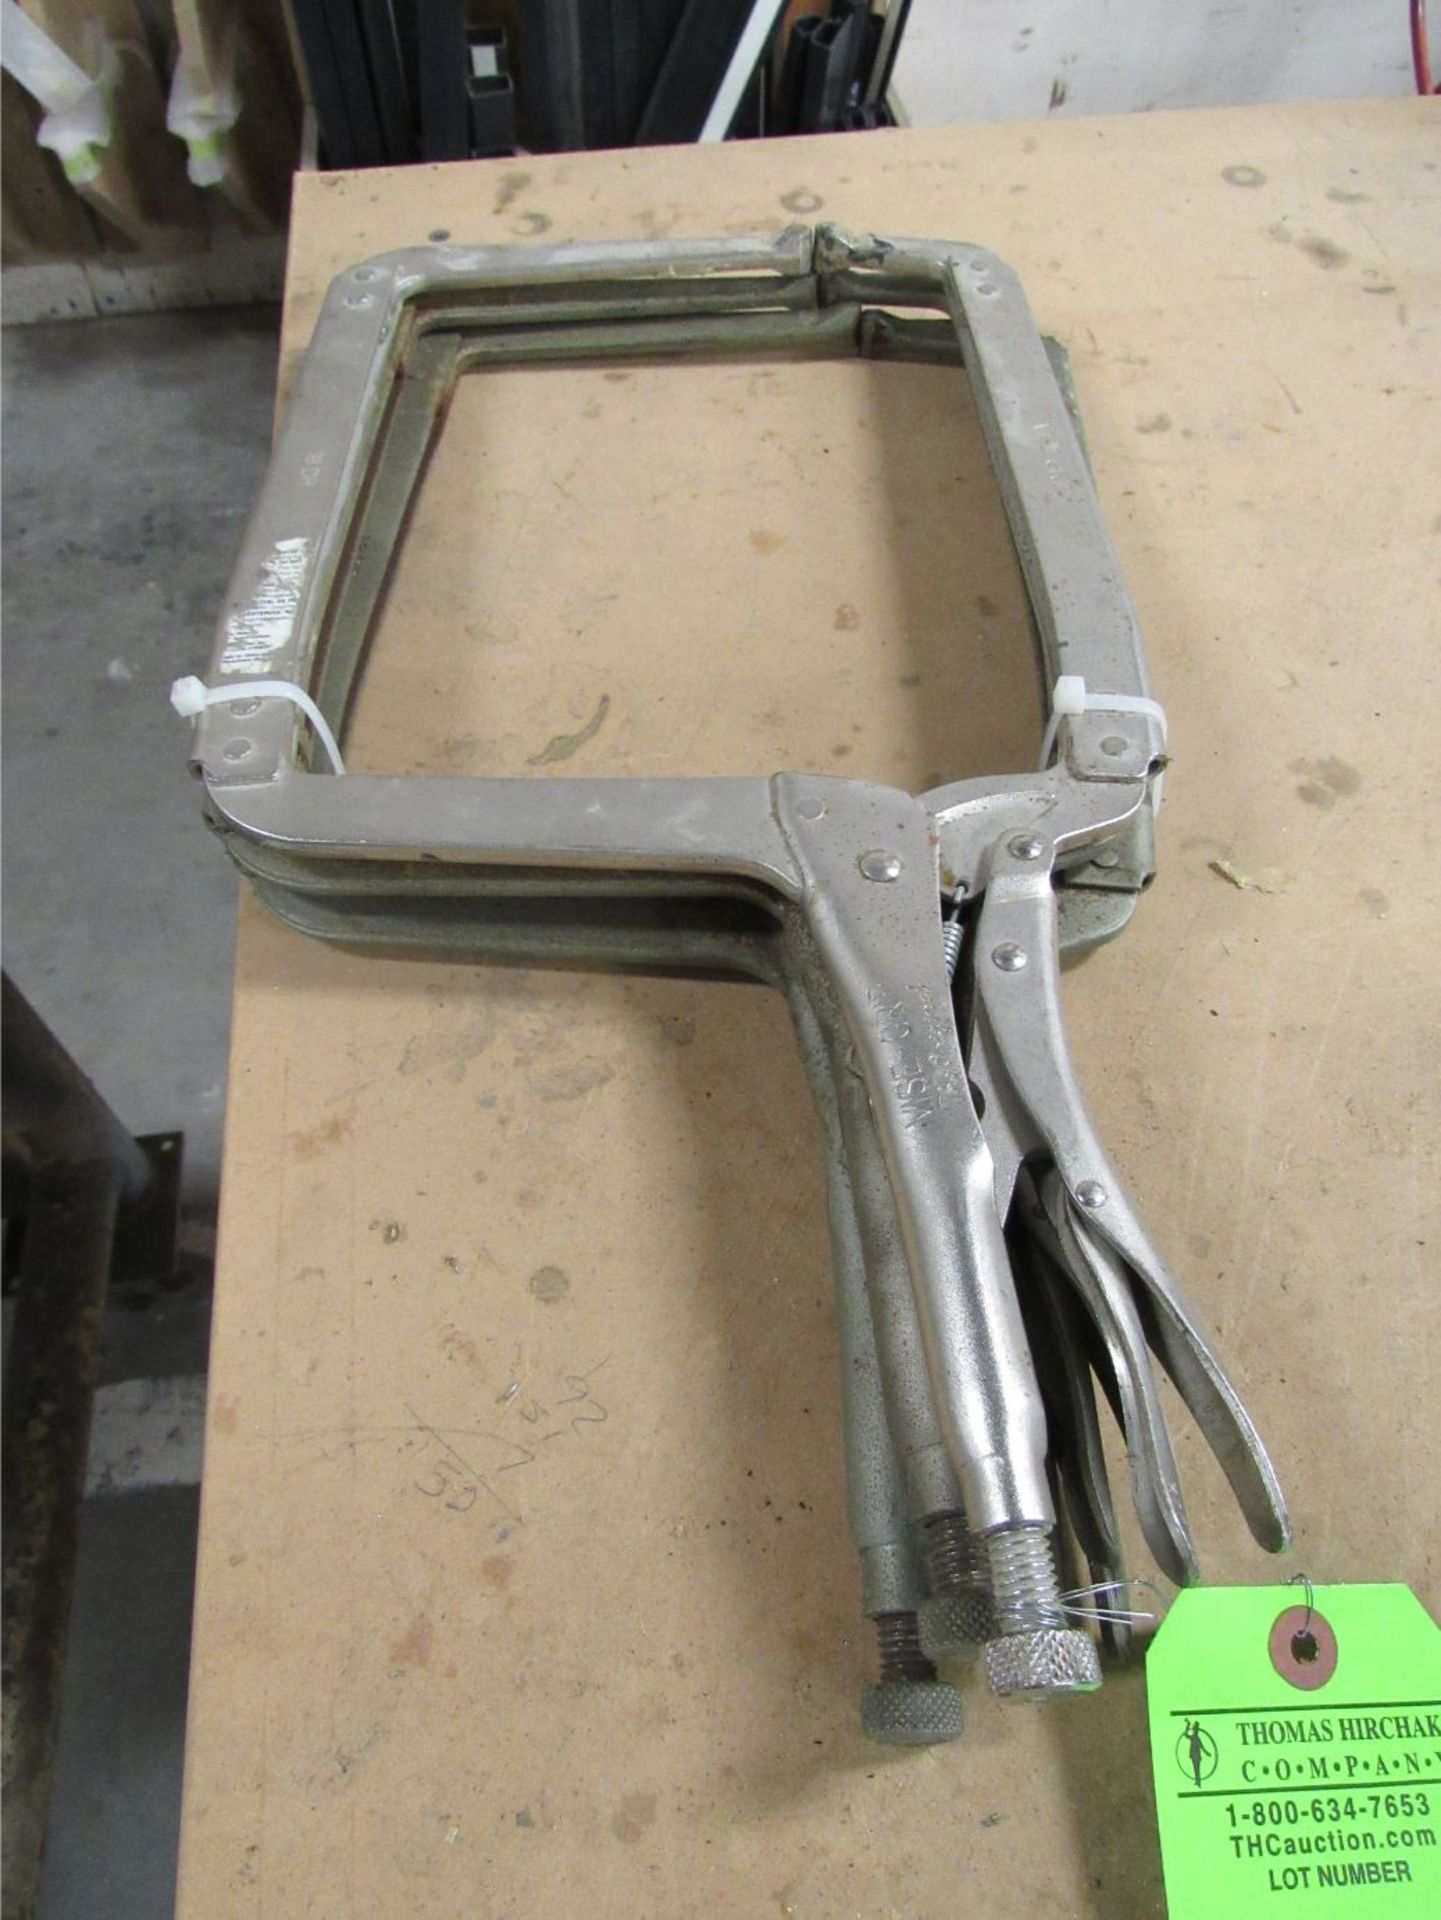 (3) Vise-Grip Clamps